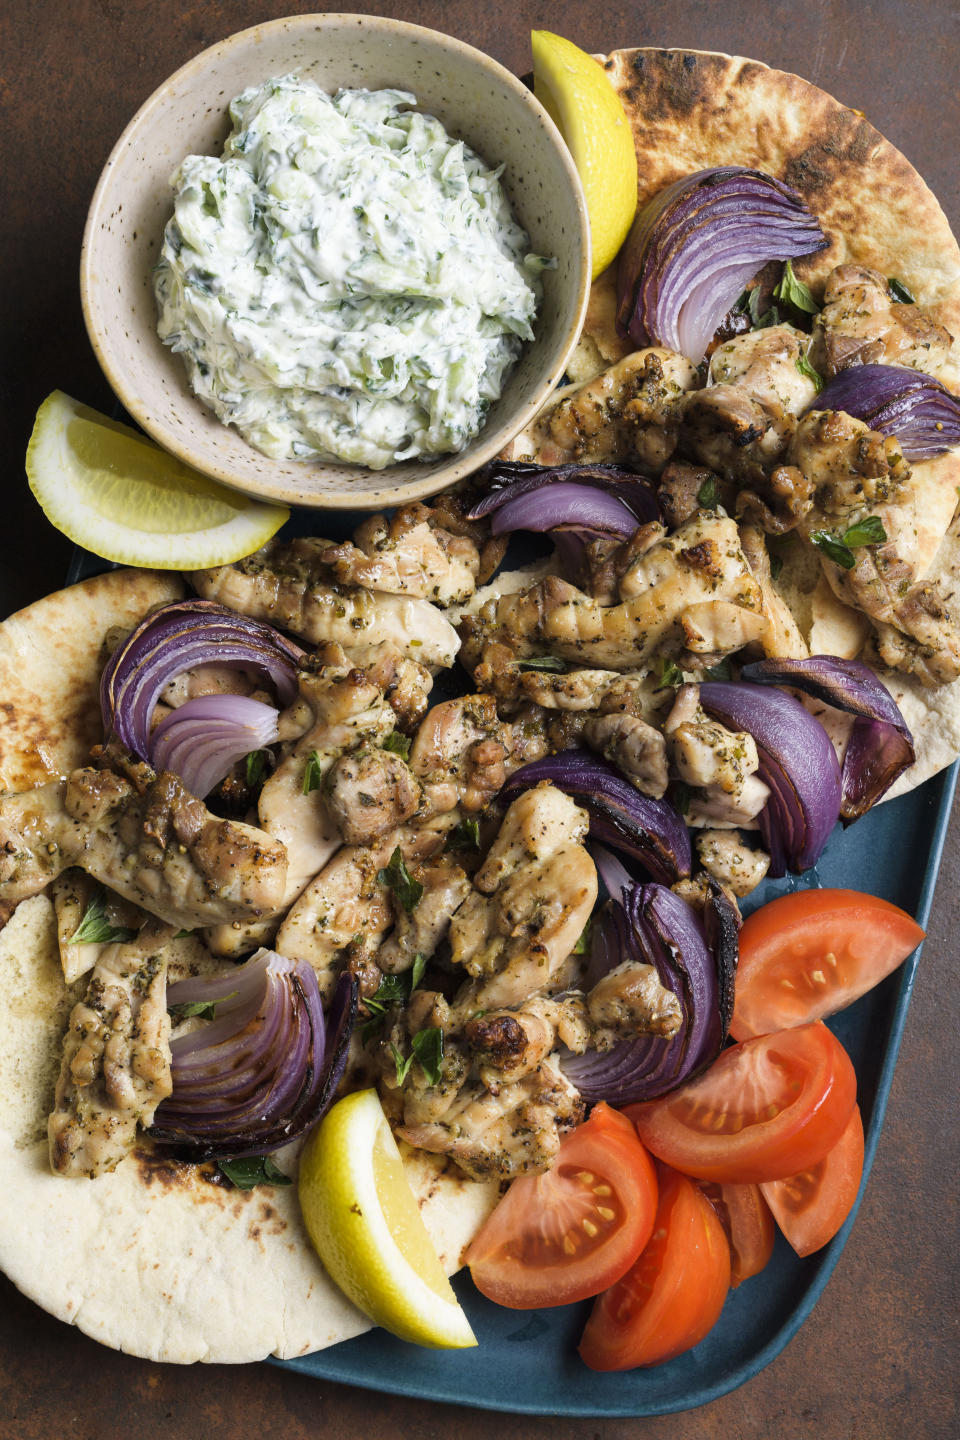 This image released by Milk Street shows a recipe for chicken souvlaki with tzatziki. (Milk Street via AP)